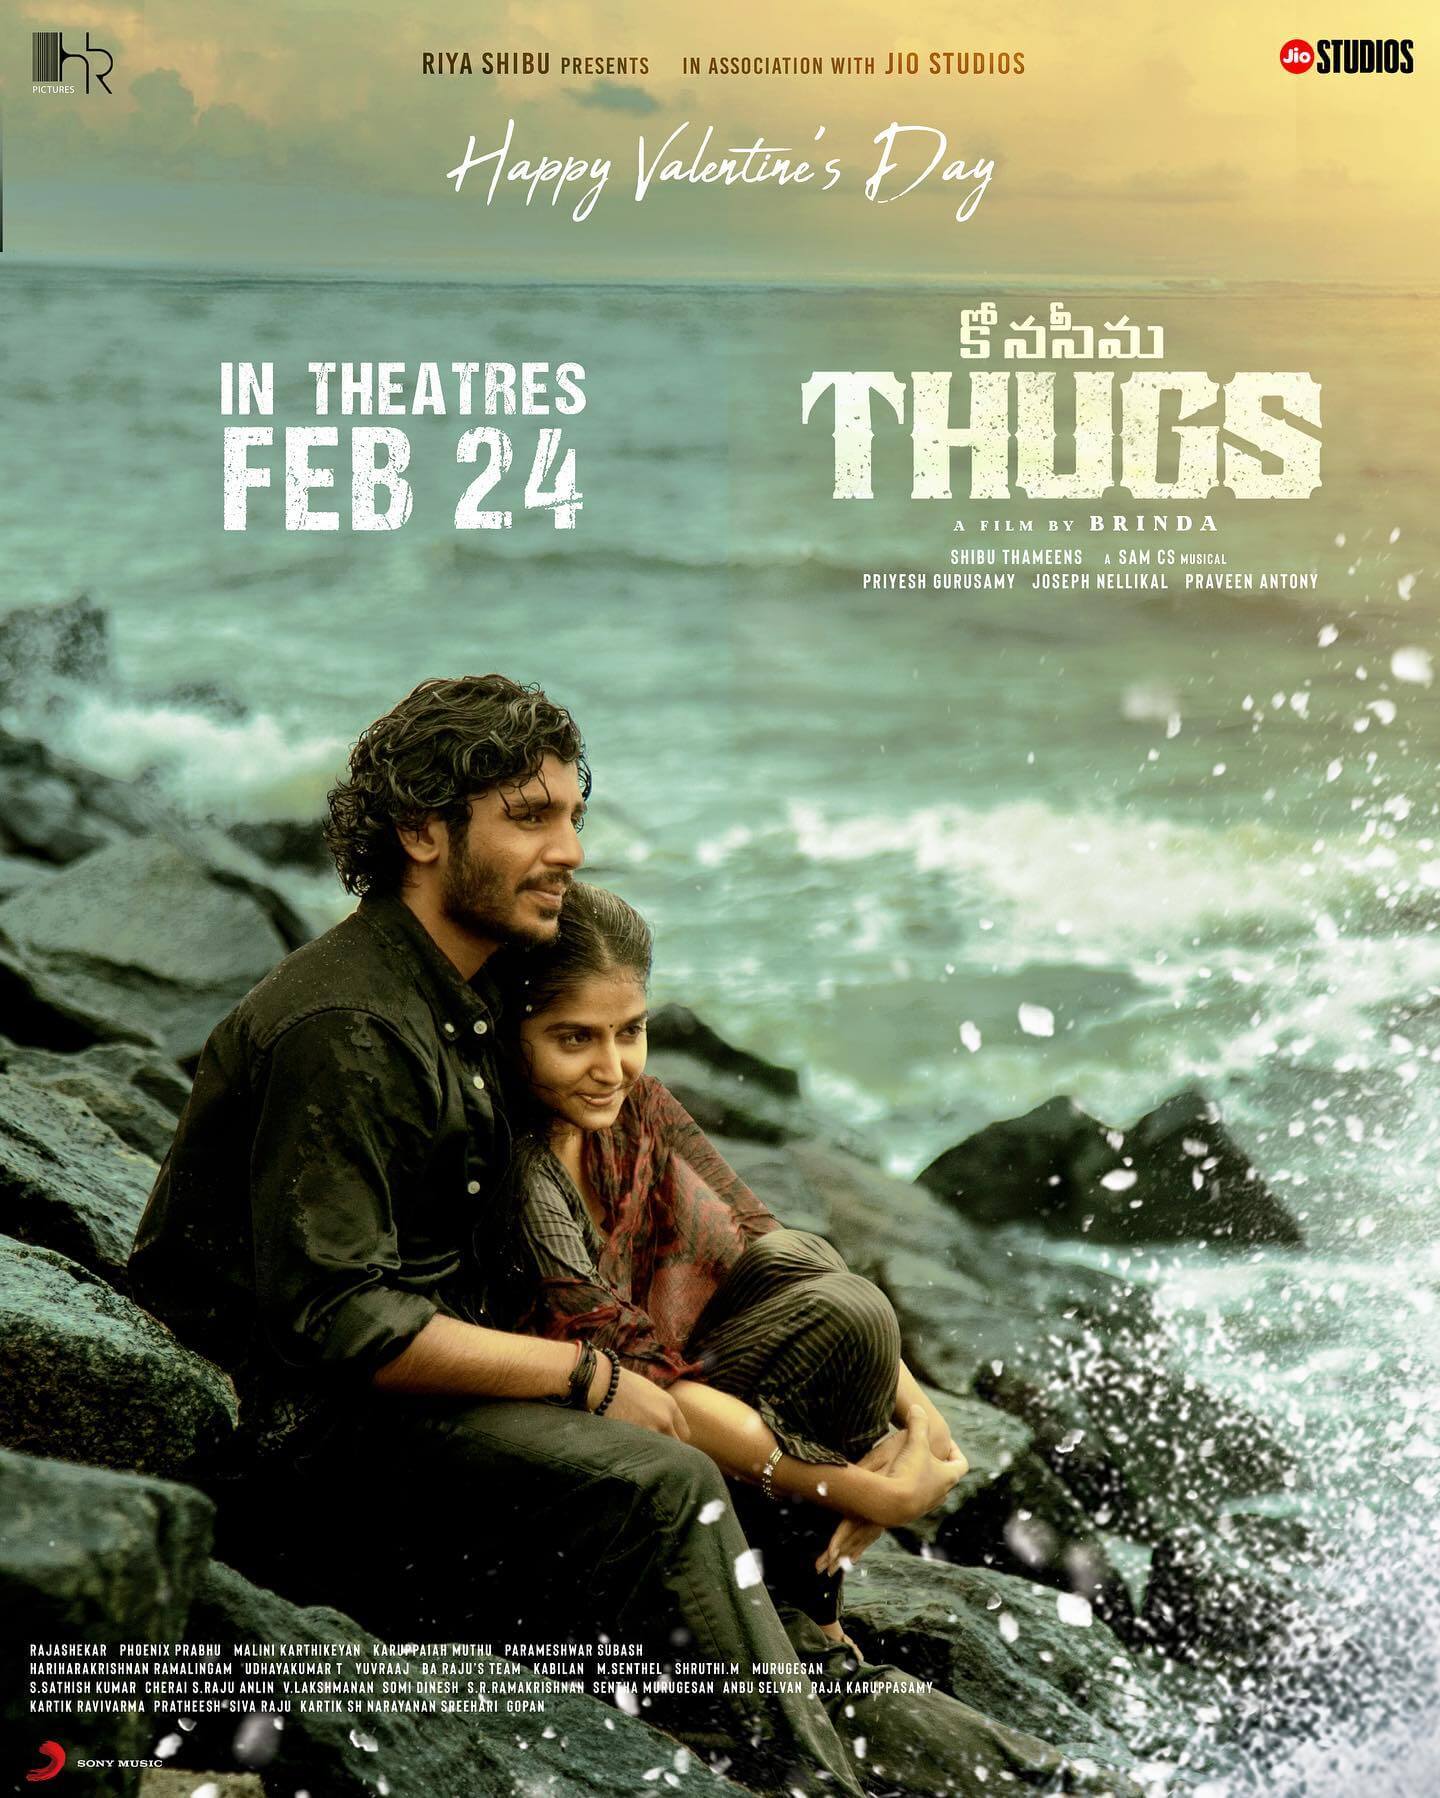 Thugs poster